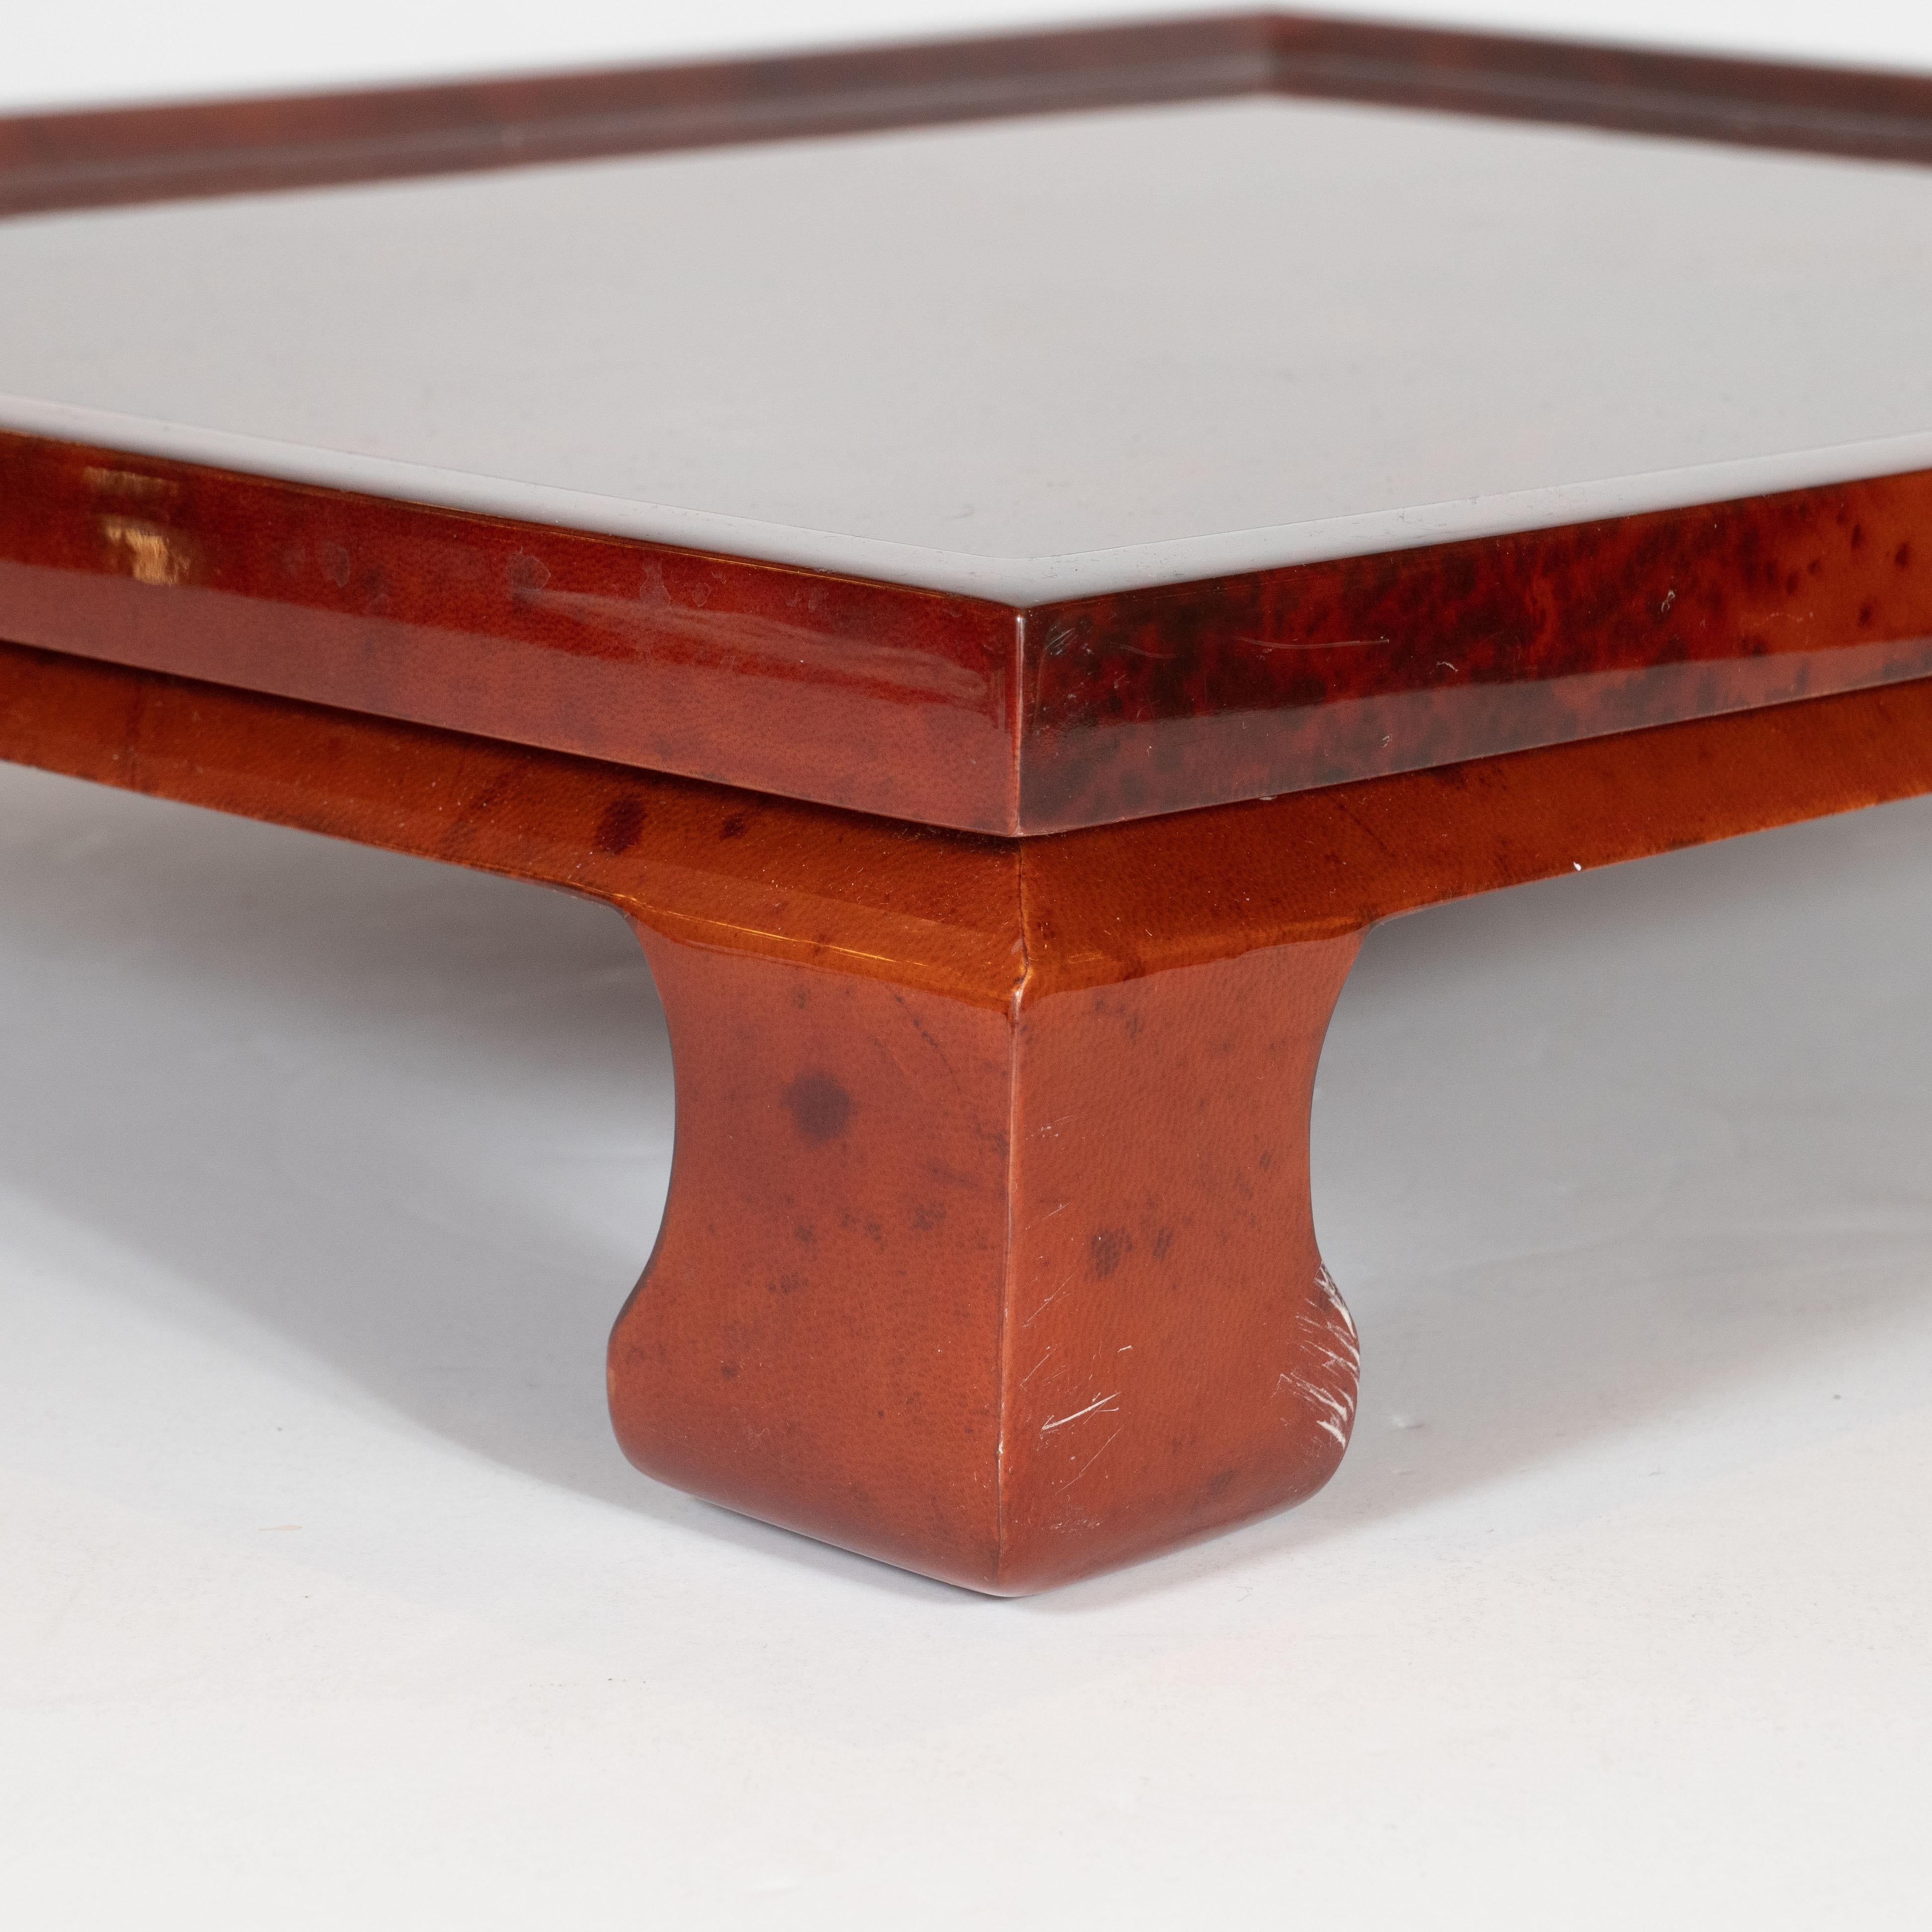 Enrique Garcel Mid-Century Modern Lacquered Goatskin Pagoda Style Bar Tray For Sale 2